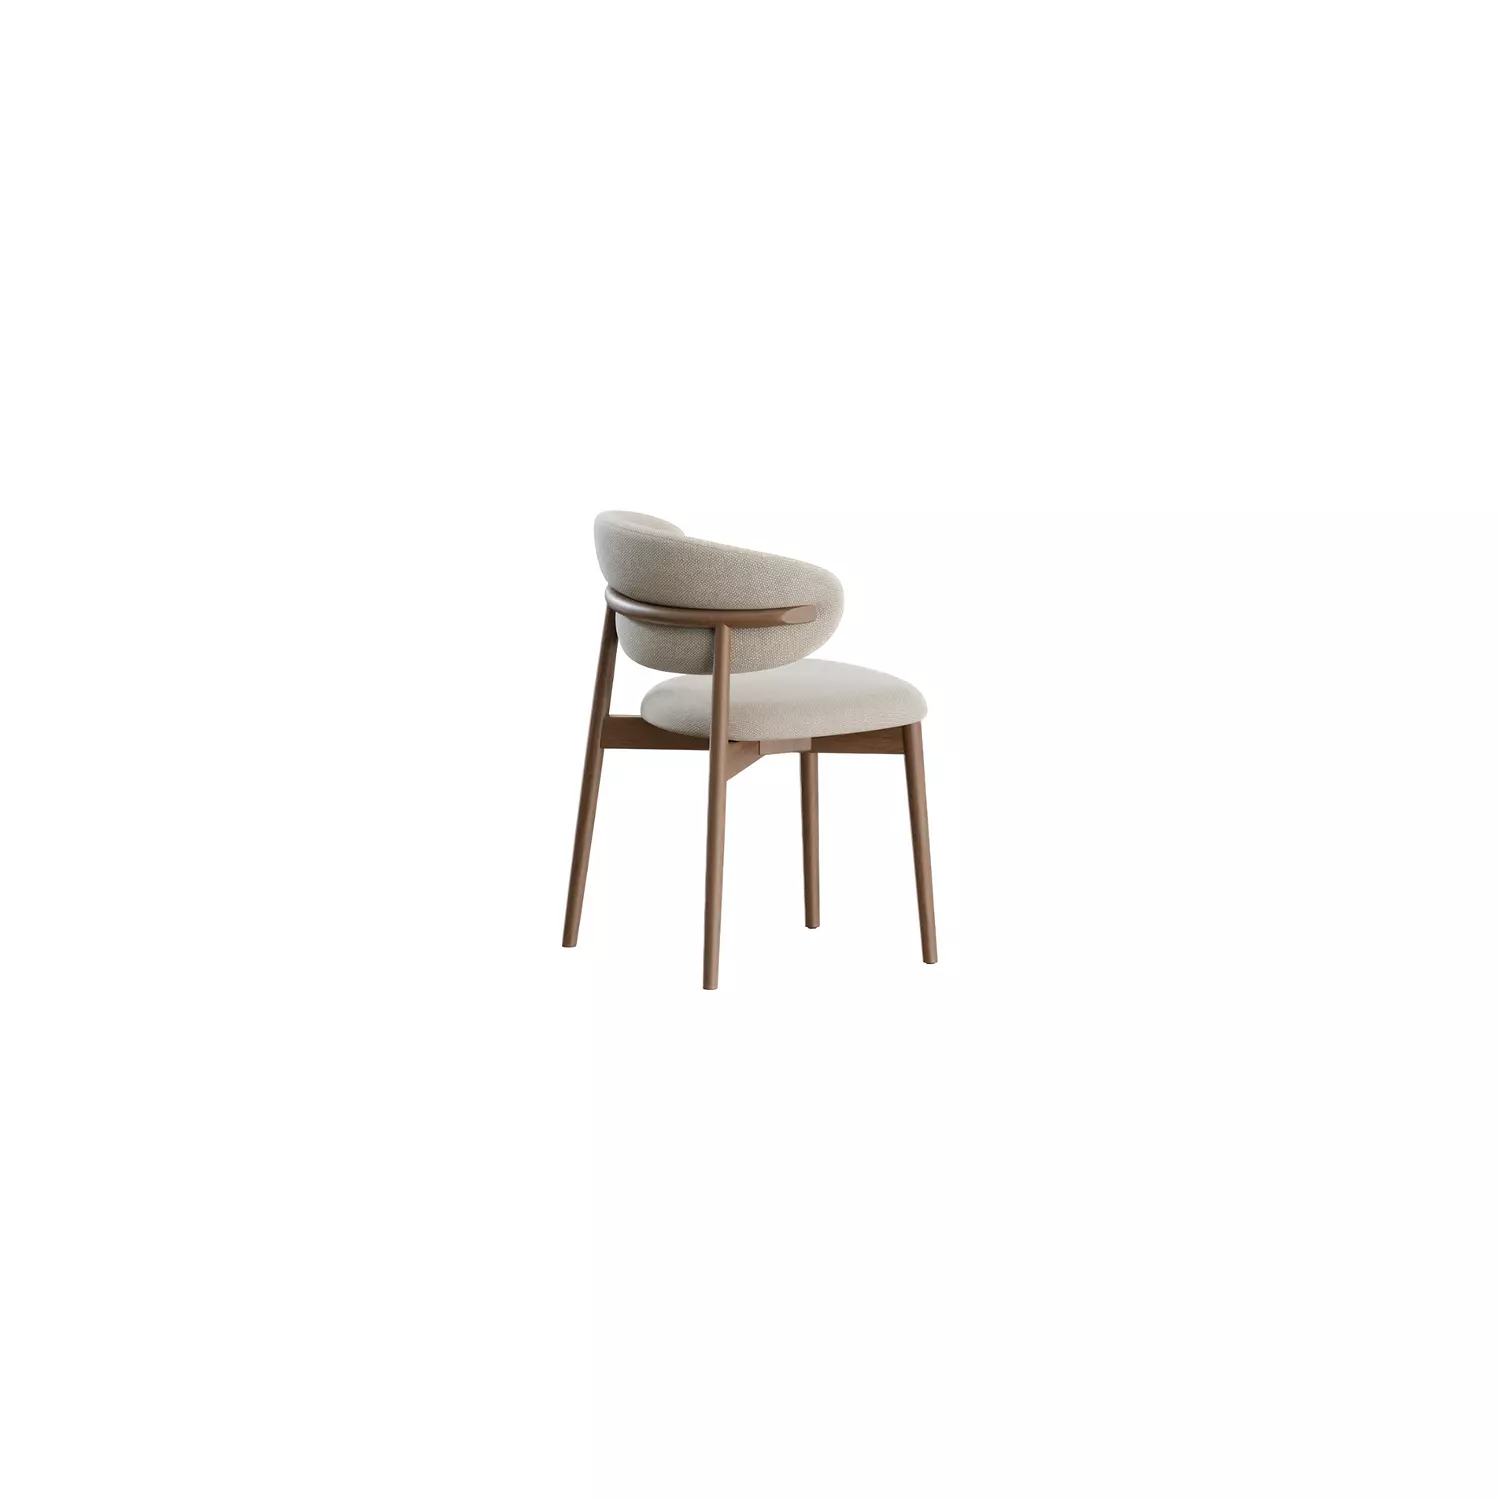 OLEANDRO CHAIR hover image